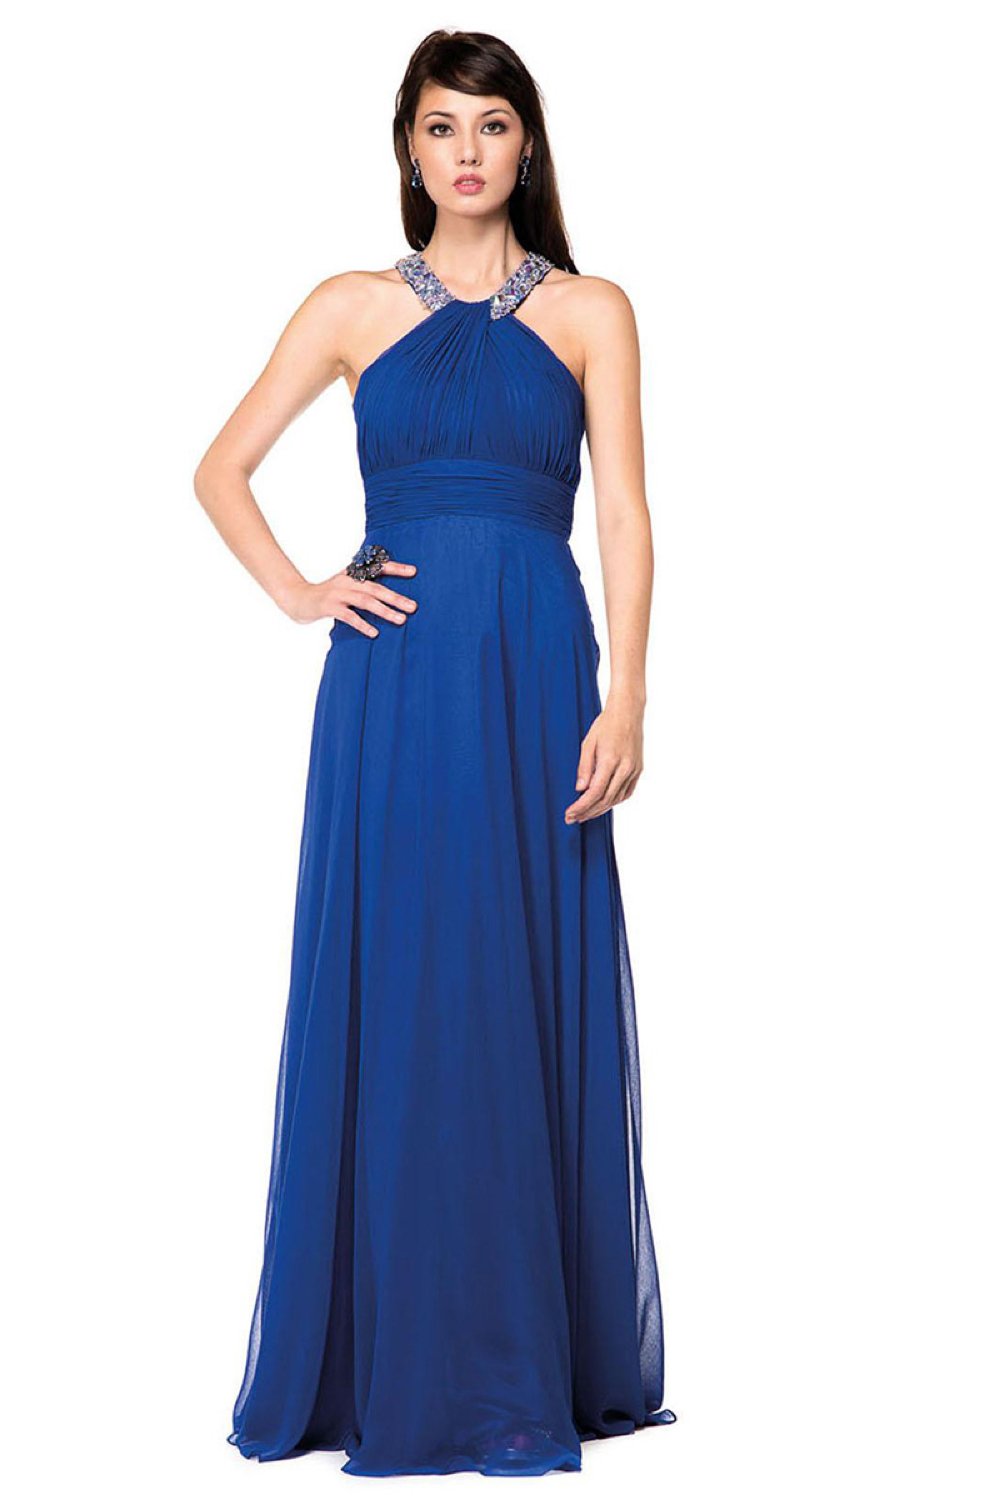 Glow by Colors - G183 Gem Beaded Halter Chiffon Evening Dress Special Occasion Dress 4 / Navy